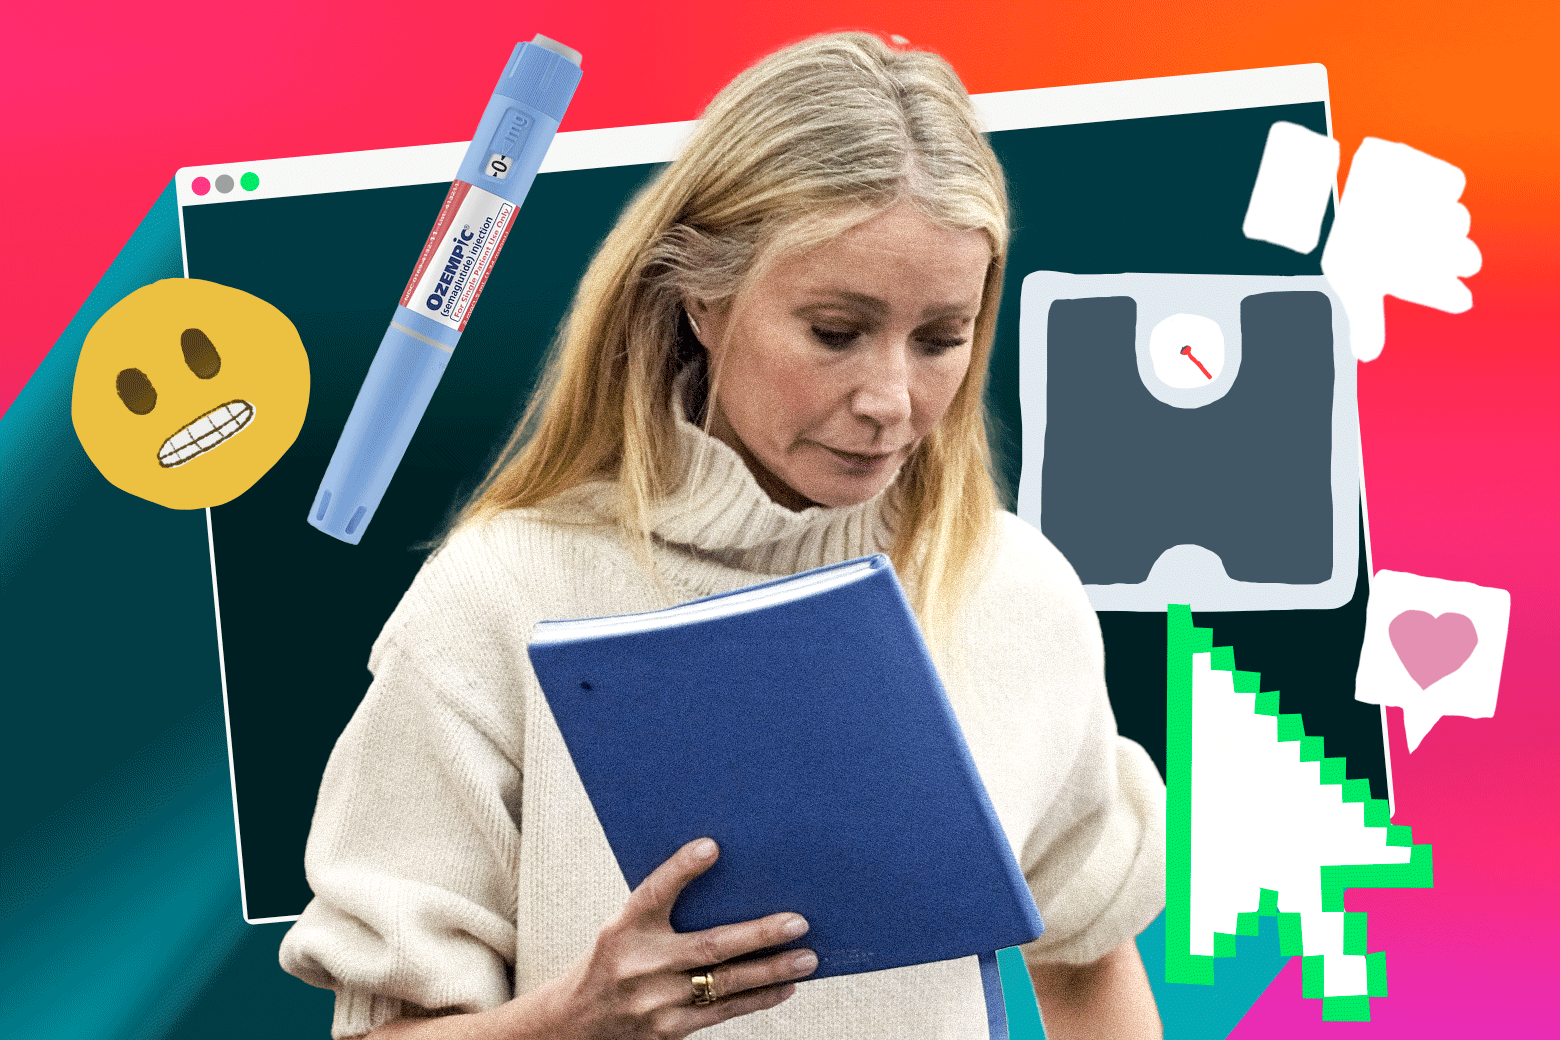 The Ozempic weight loss drug craze and Gwyneth Paltrow's eating habits.